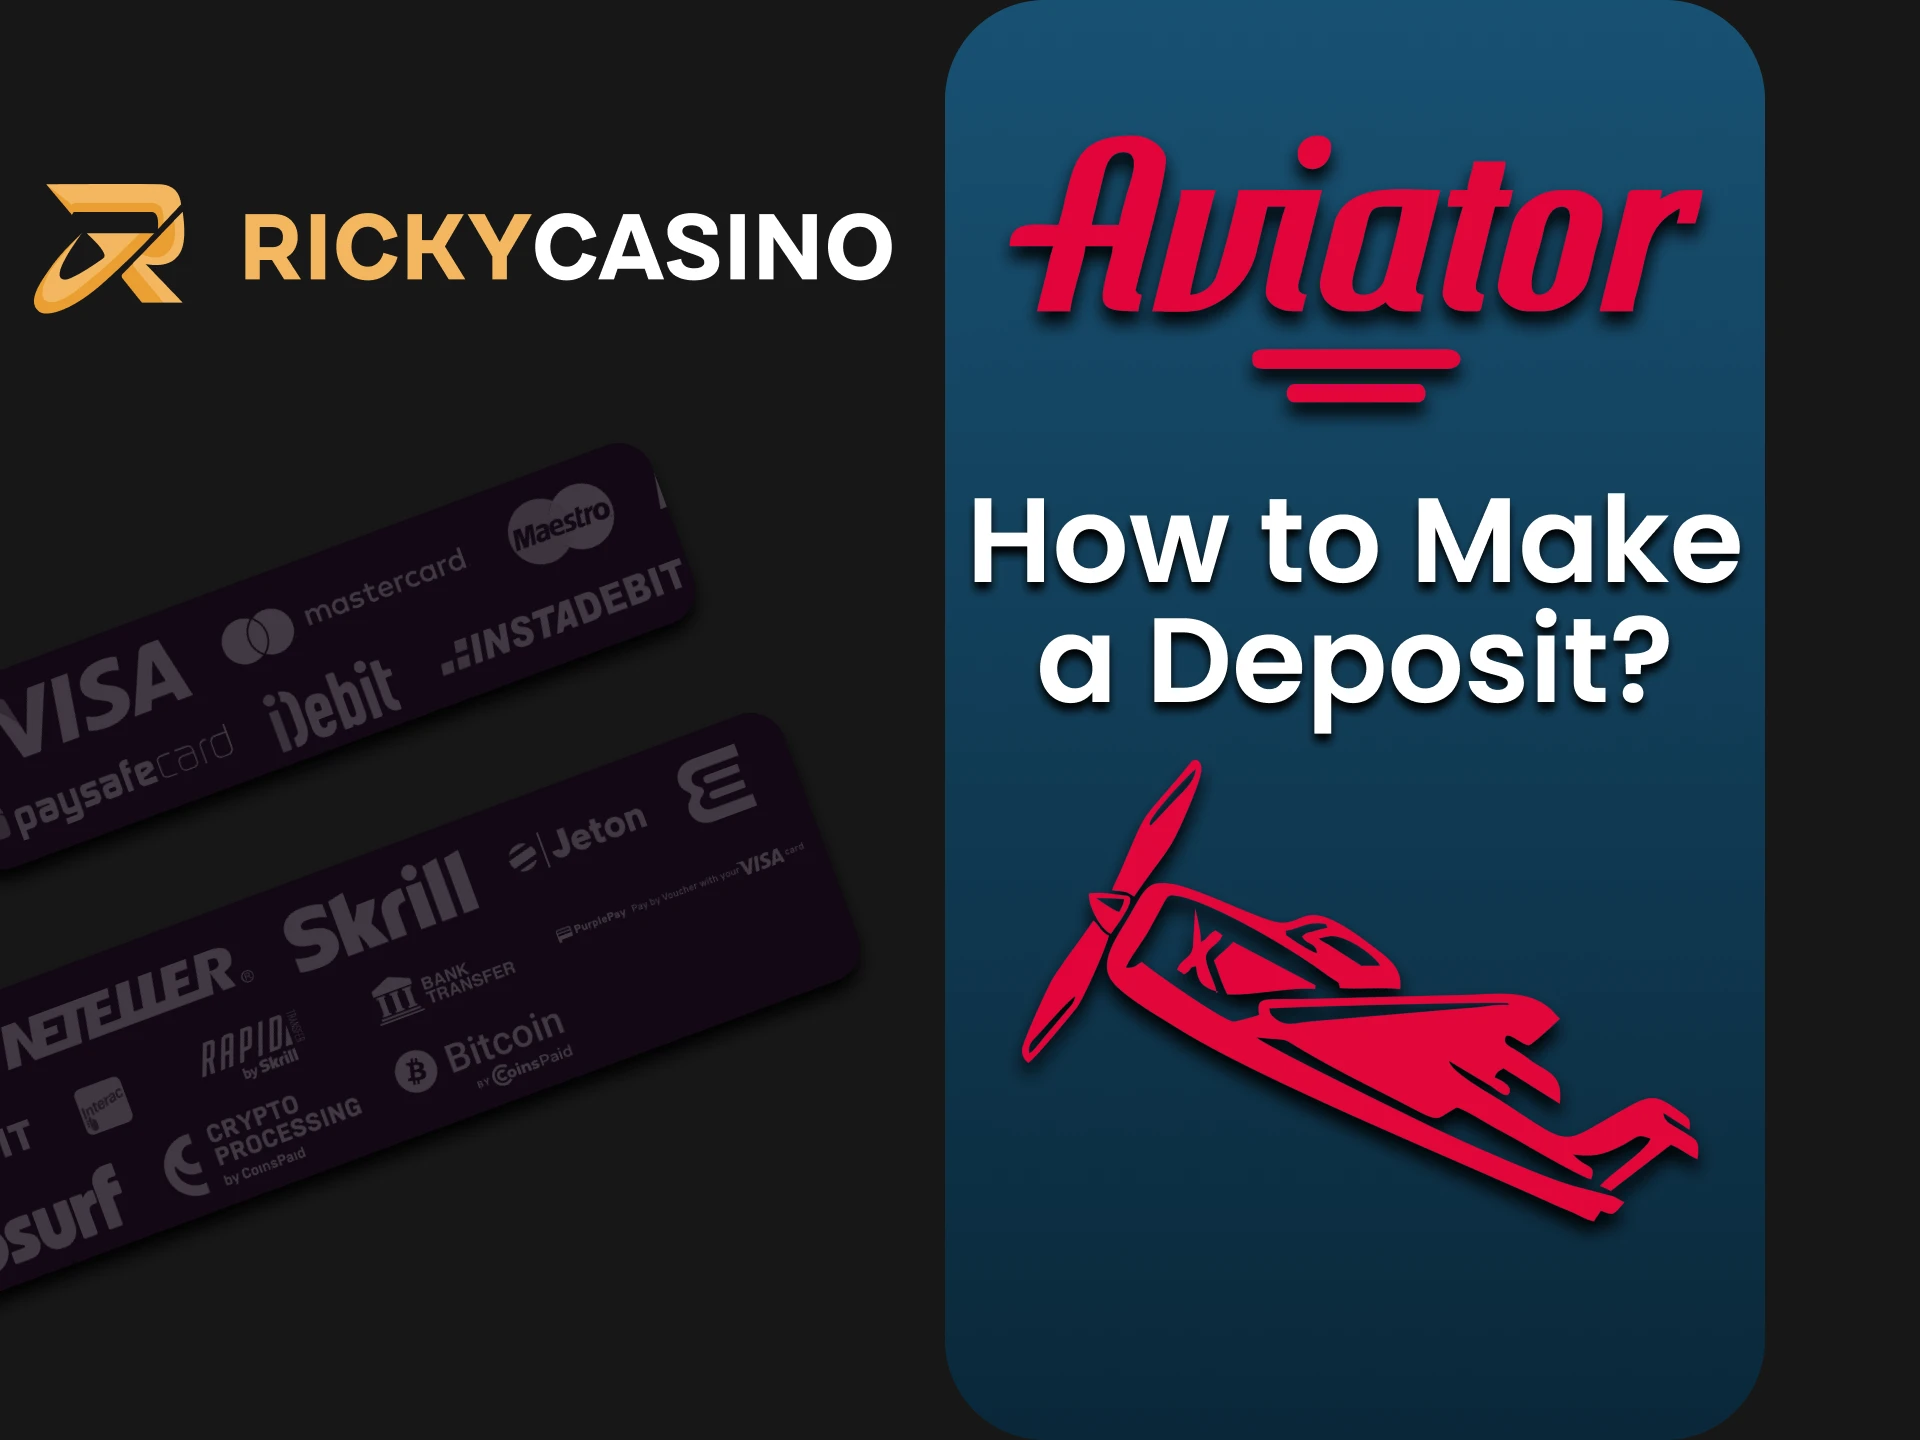 We will tell you how to top up your funds for the Aviator game at Ricky Casino.